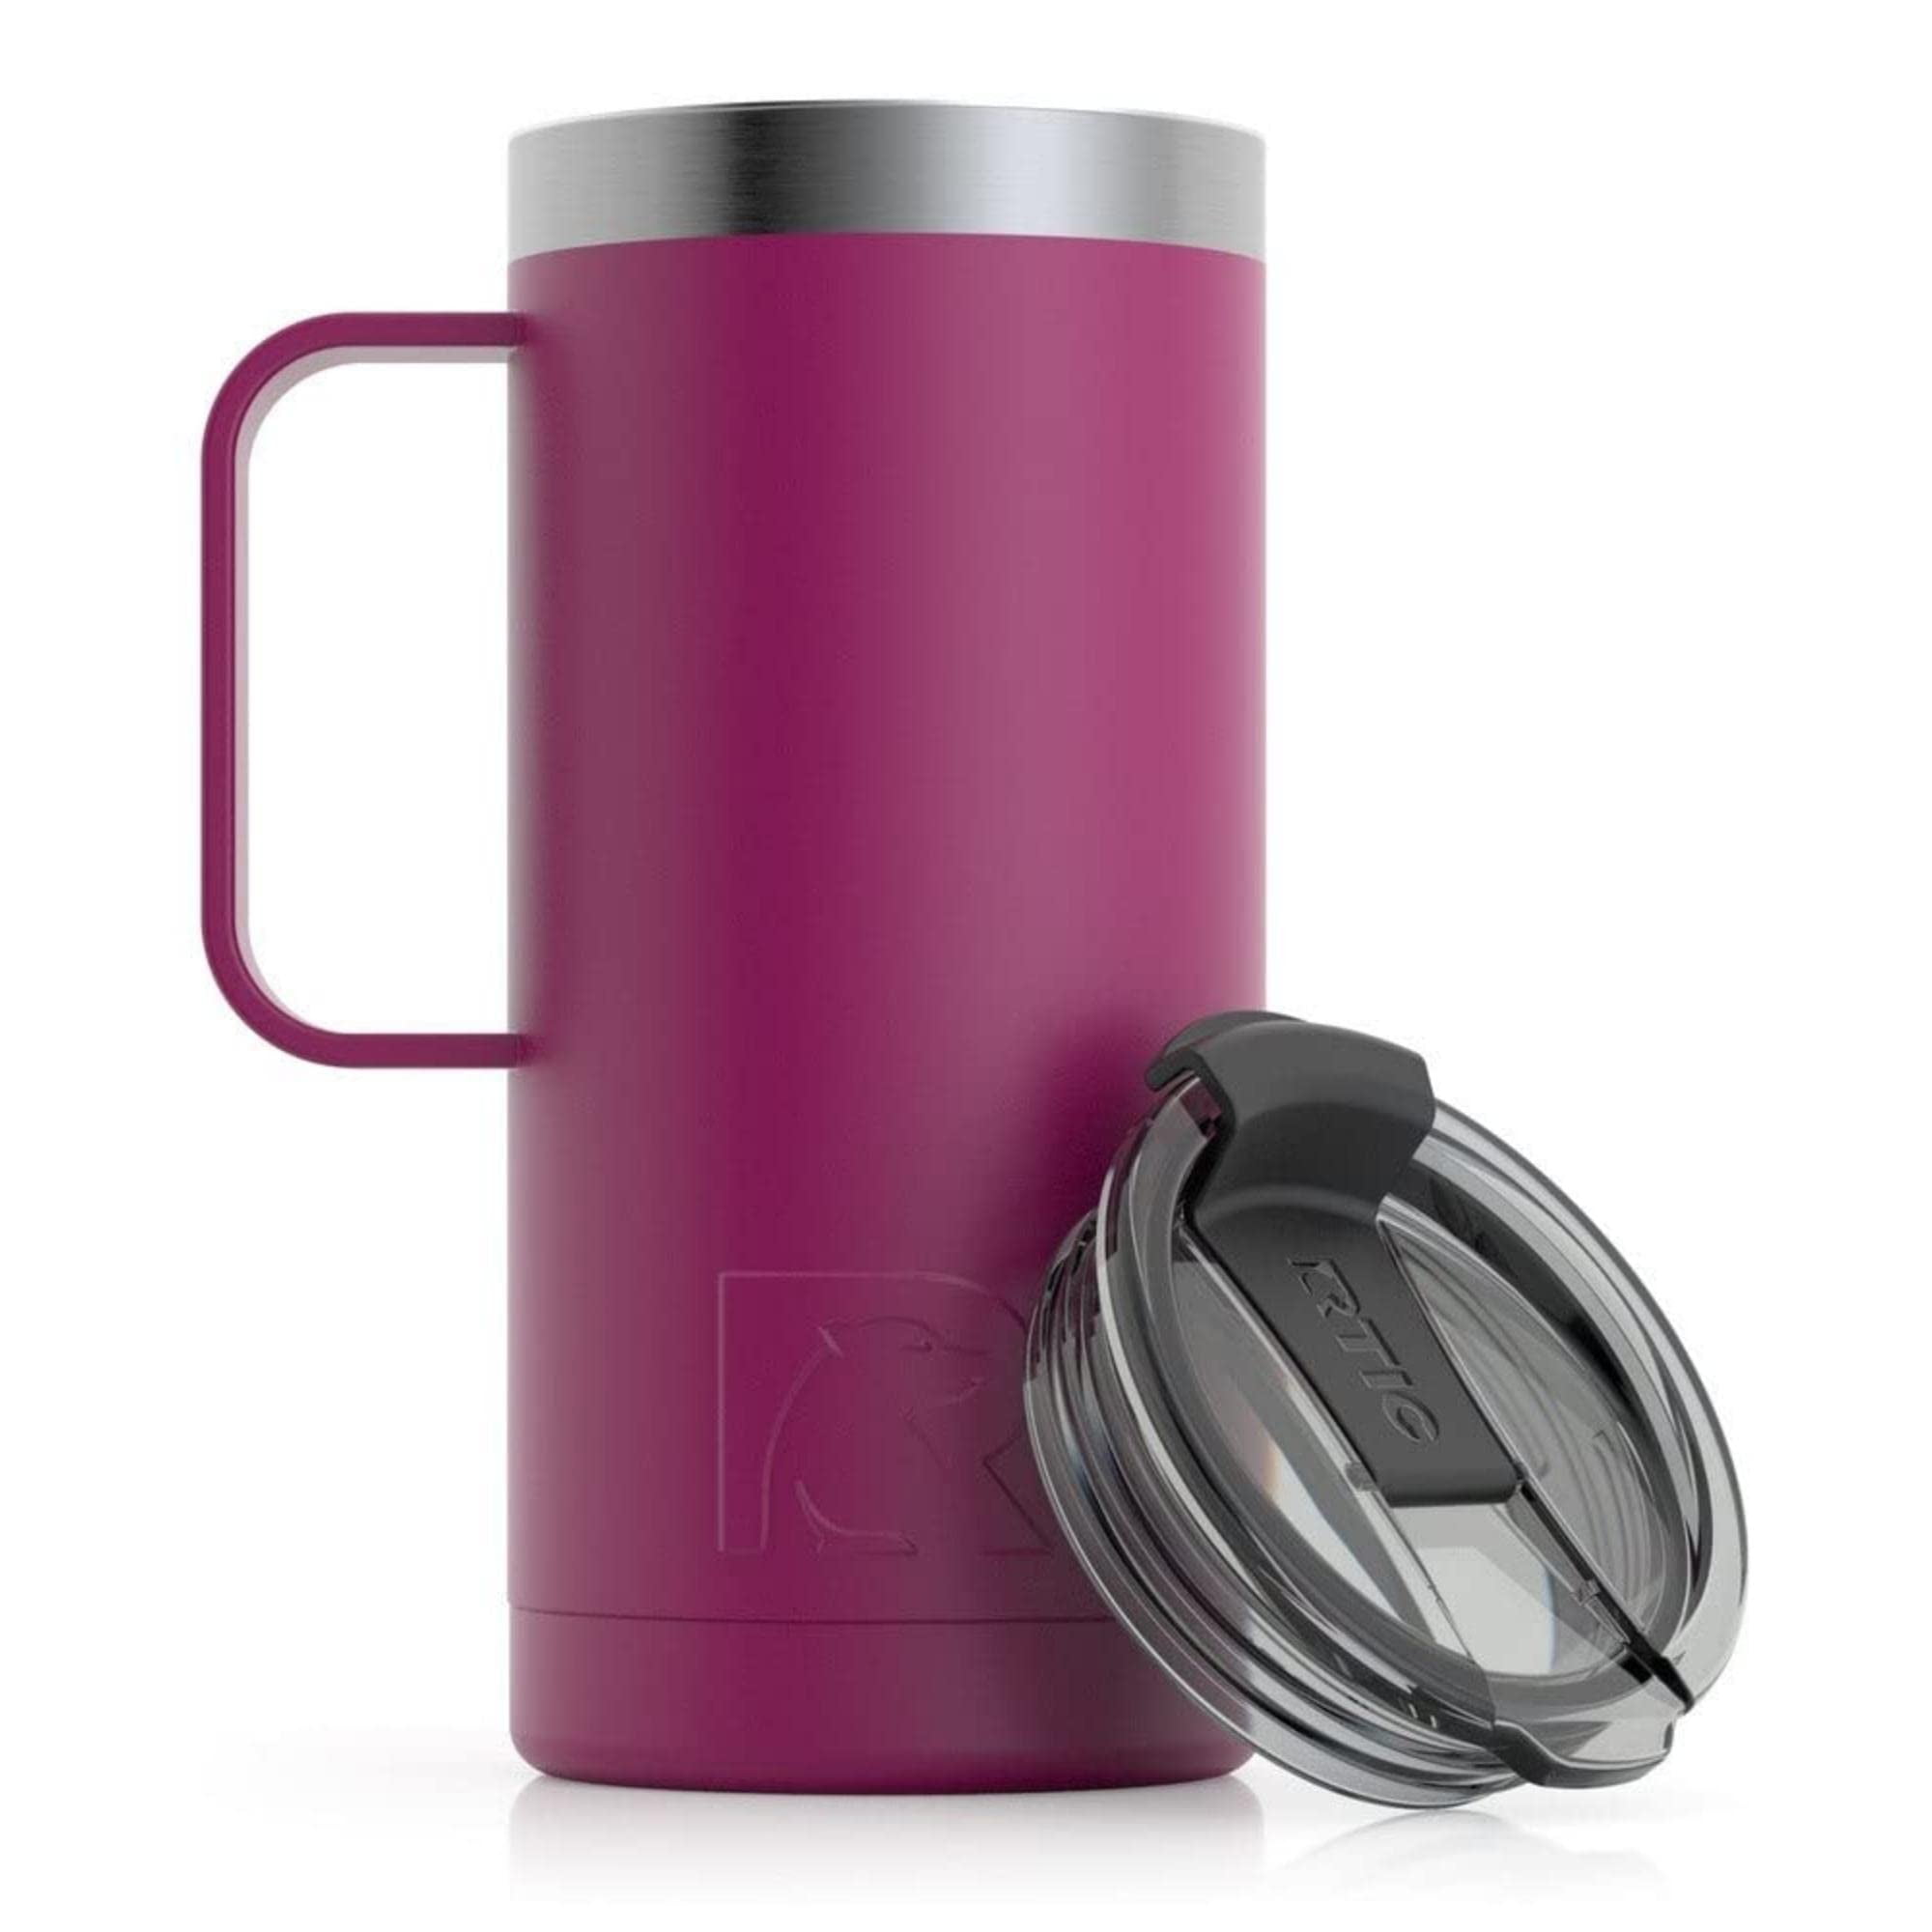 RTIC 20 oz Coffee Travel Mug with Lid and Handle, Stainless Steel  Vacuum-Insulated Mugs, Leak, Spill Proof, Hot Beverage and Cold, Portable  Thermal Tumbler Cup for Car, Camping, Stainless 